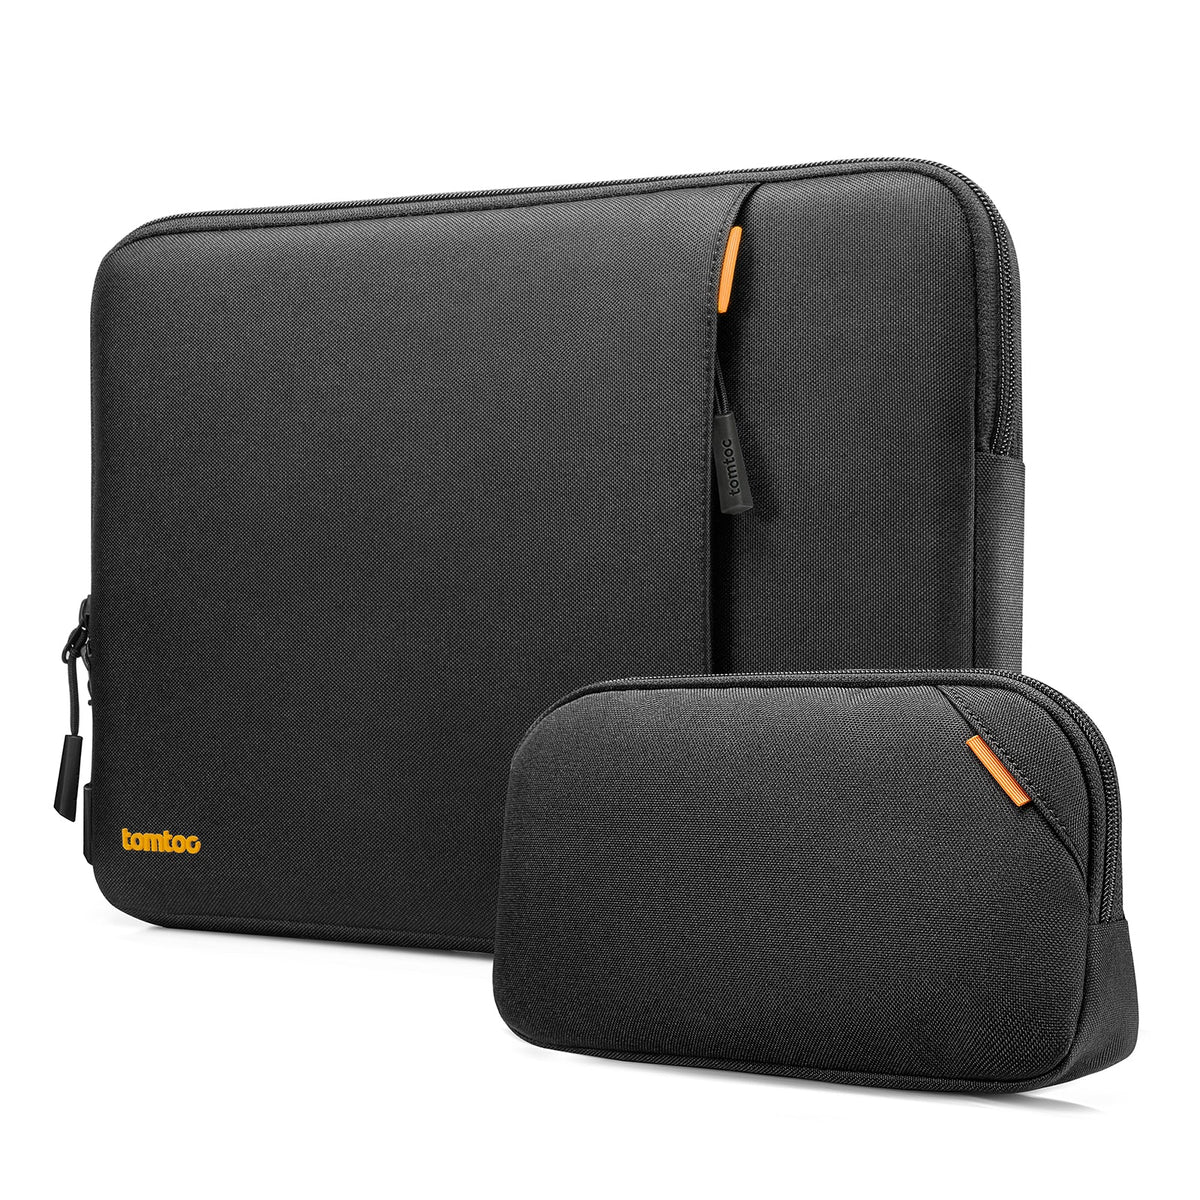 tomtoc 16 Inch Versatile 360 Protective MacBook Sleeve With Accessories Pouch - Black